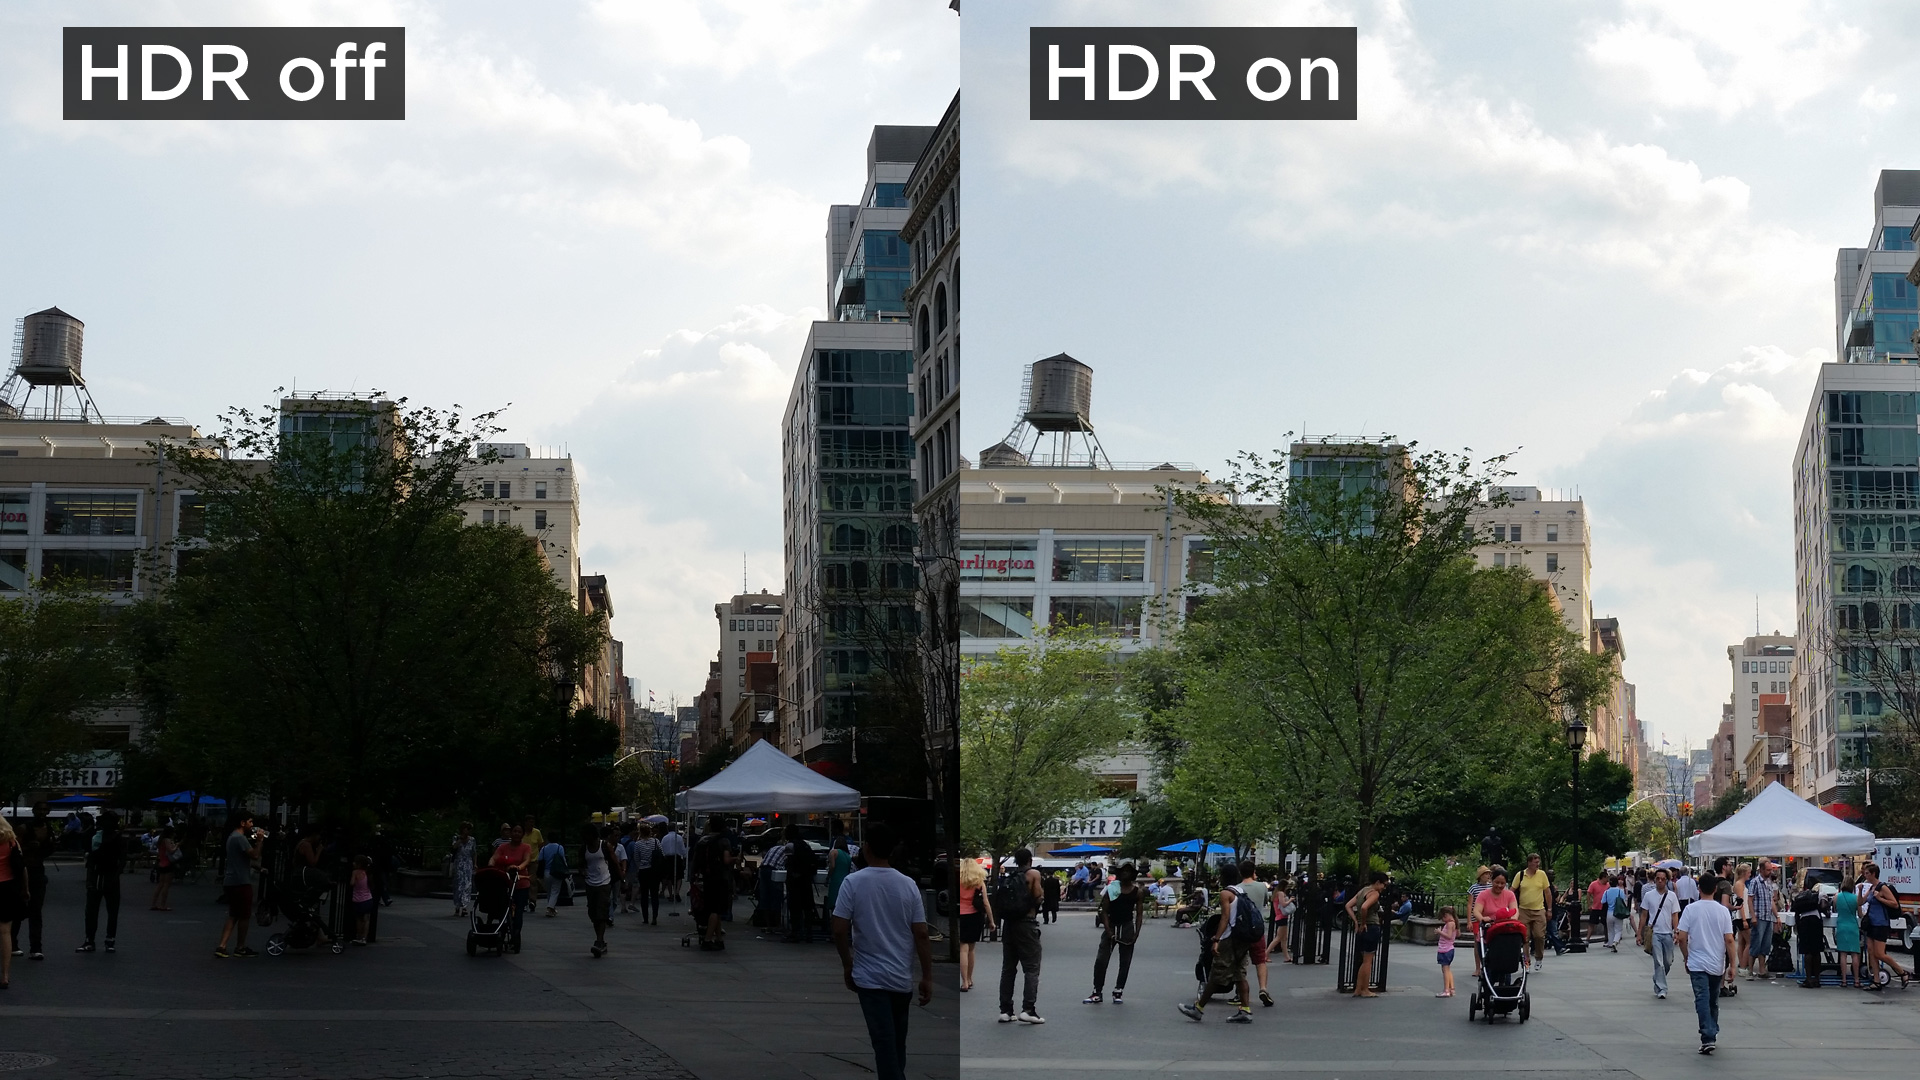 Taking And Printing Photos Using HDR Mode